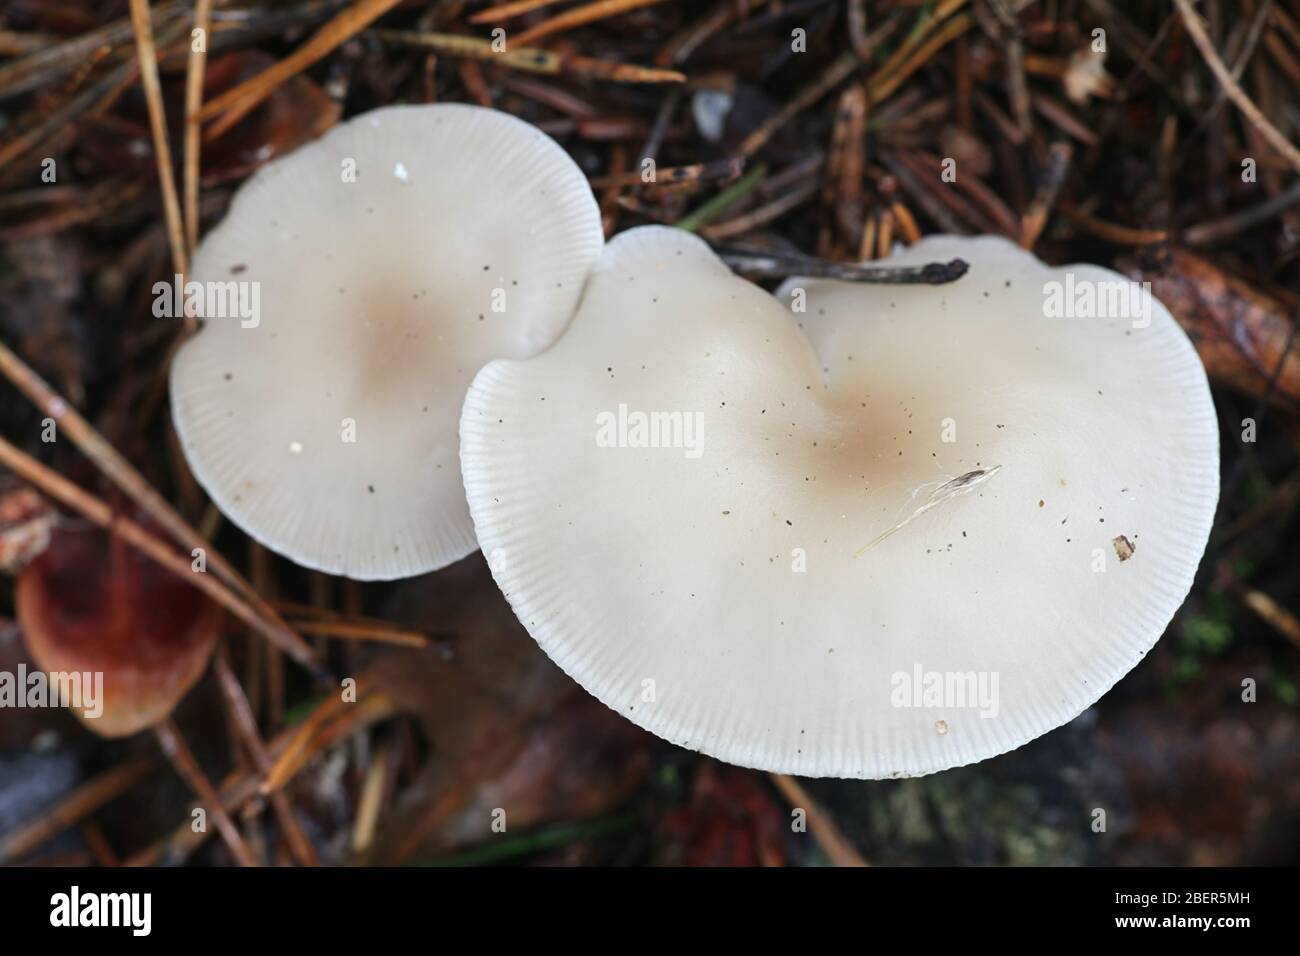 Clitocybe fragrans, known as Fragrant Funnel, wild mushroom from Finland Stock Photo